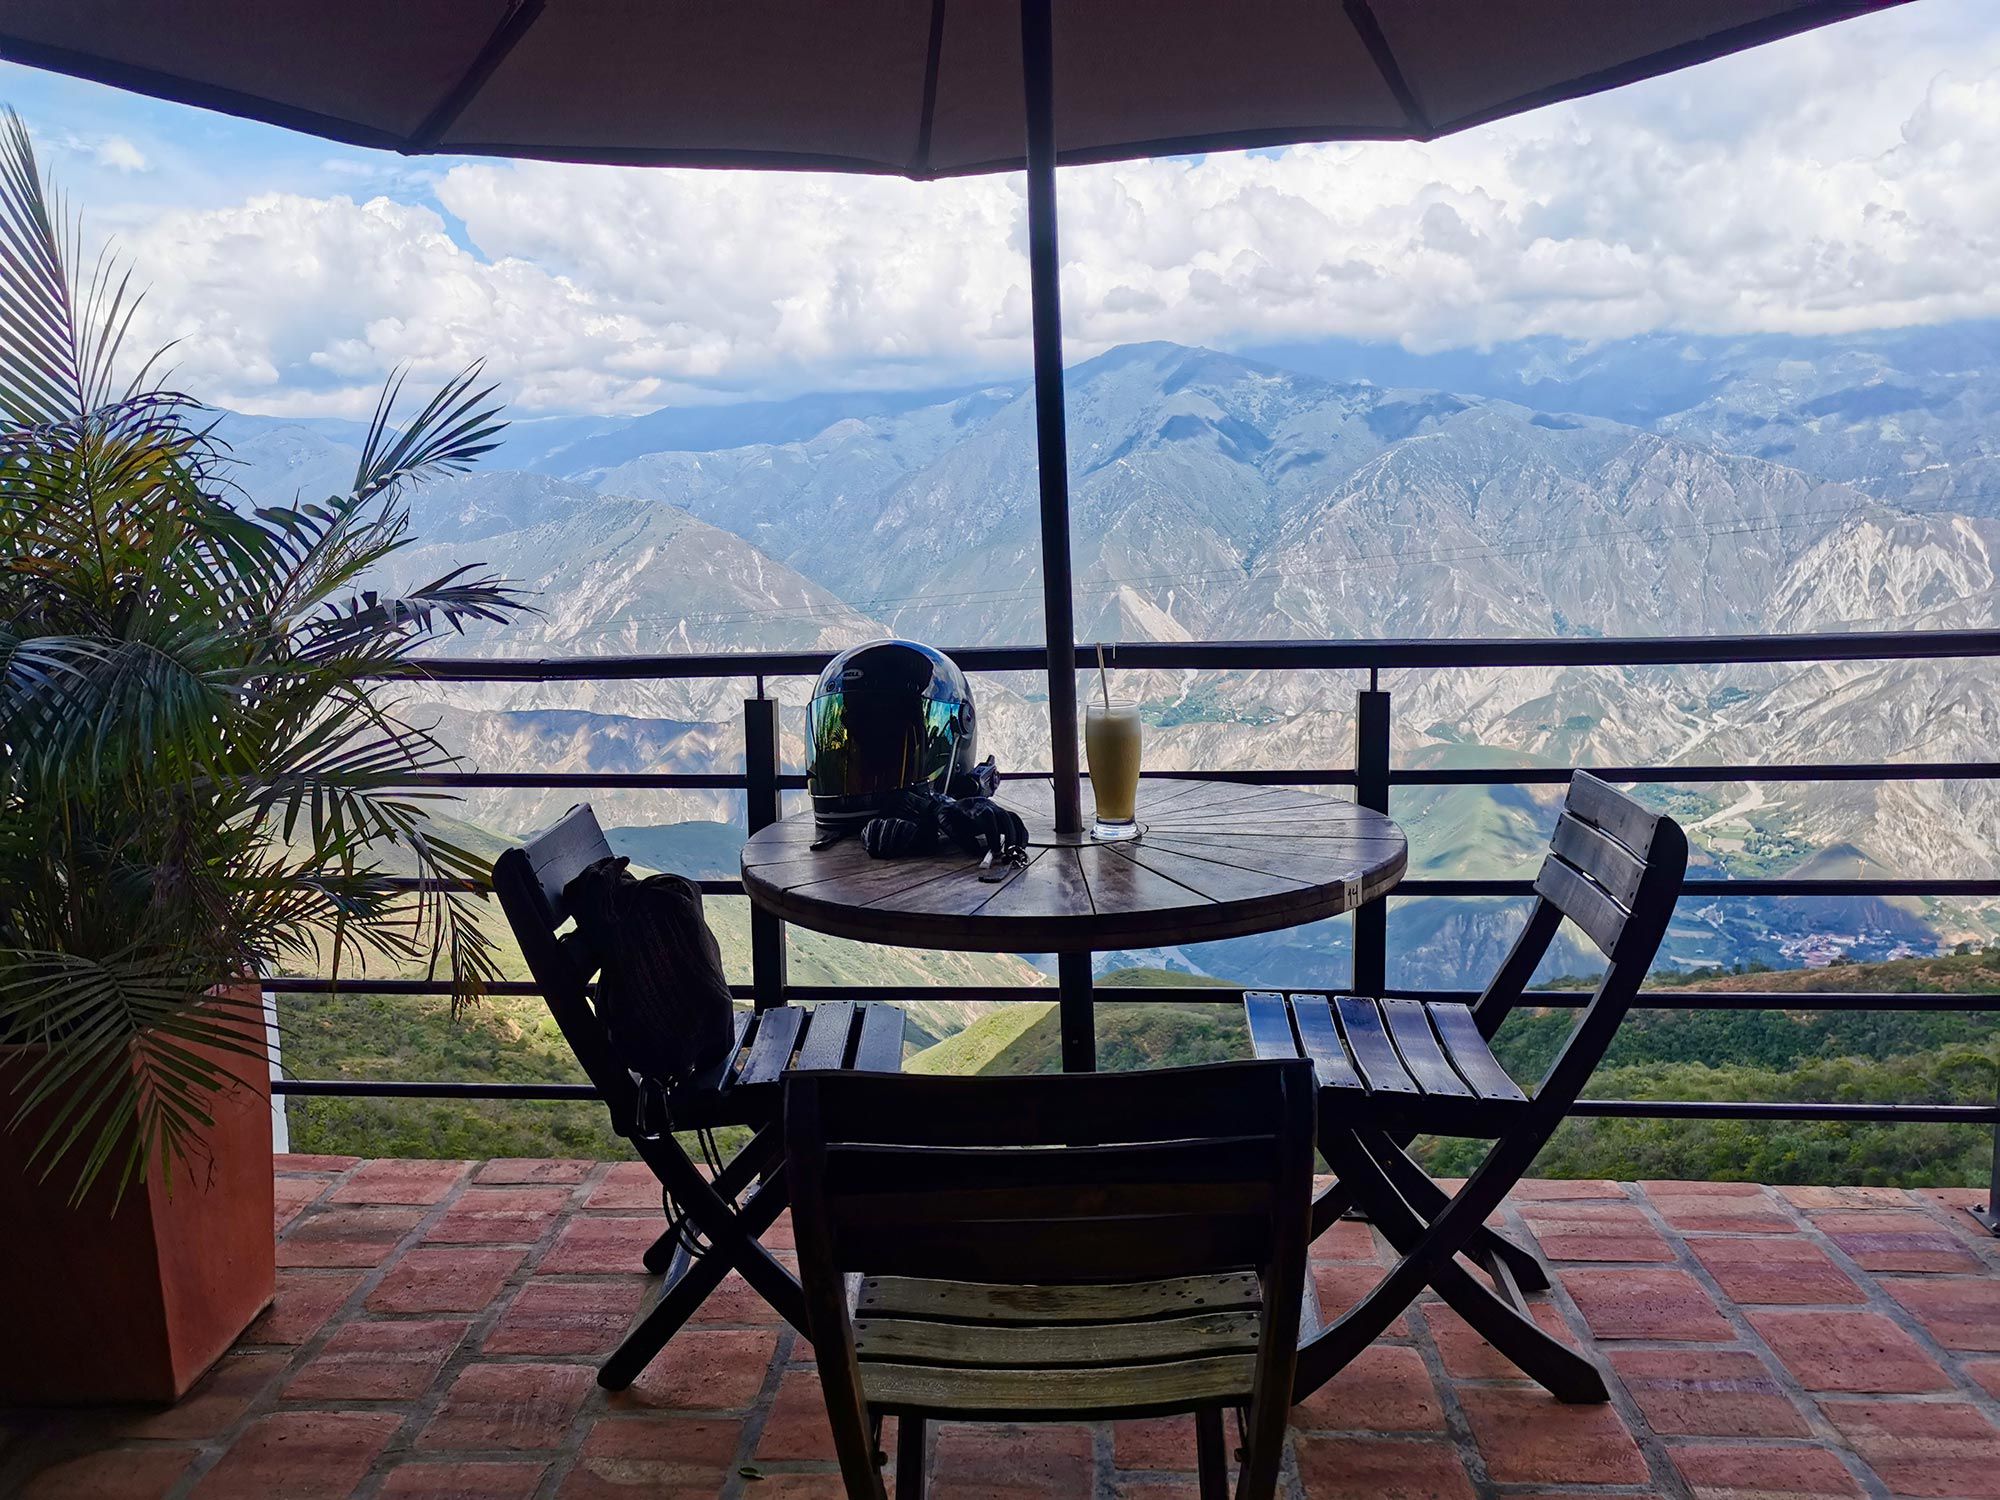 Nothing like a quick stop for a tropical juice at this epic viewpoint, Rincón de Chicamocha.